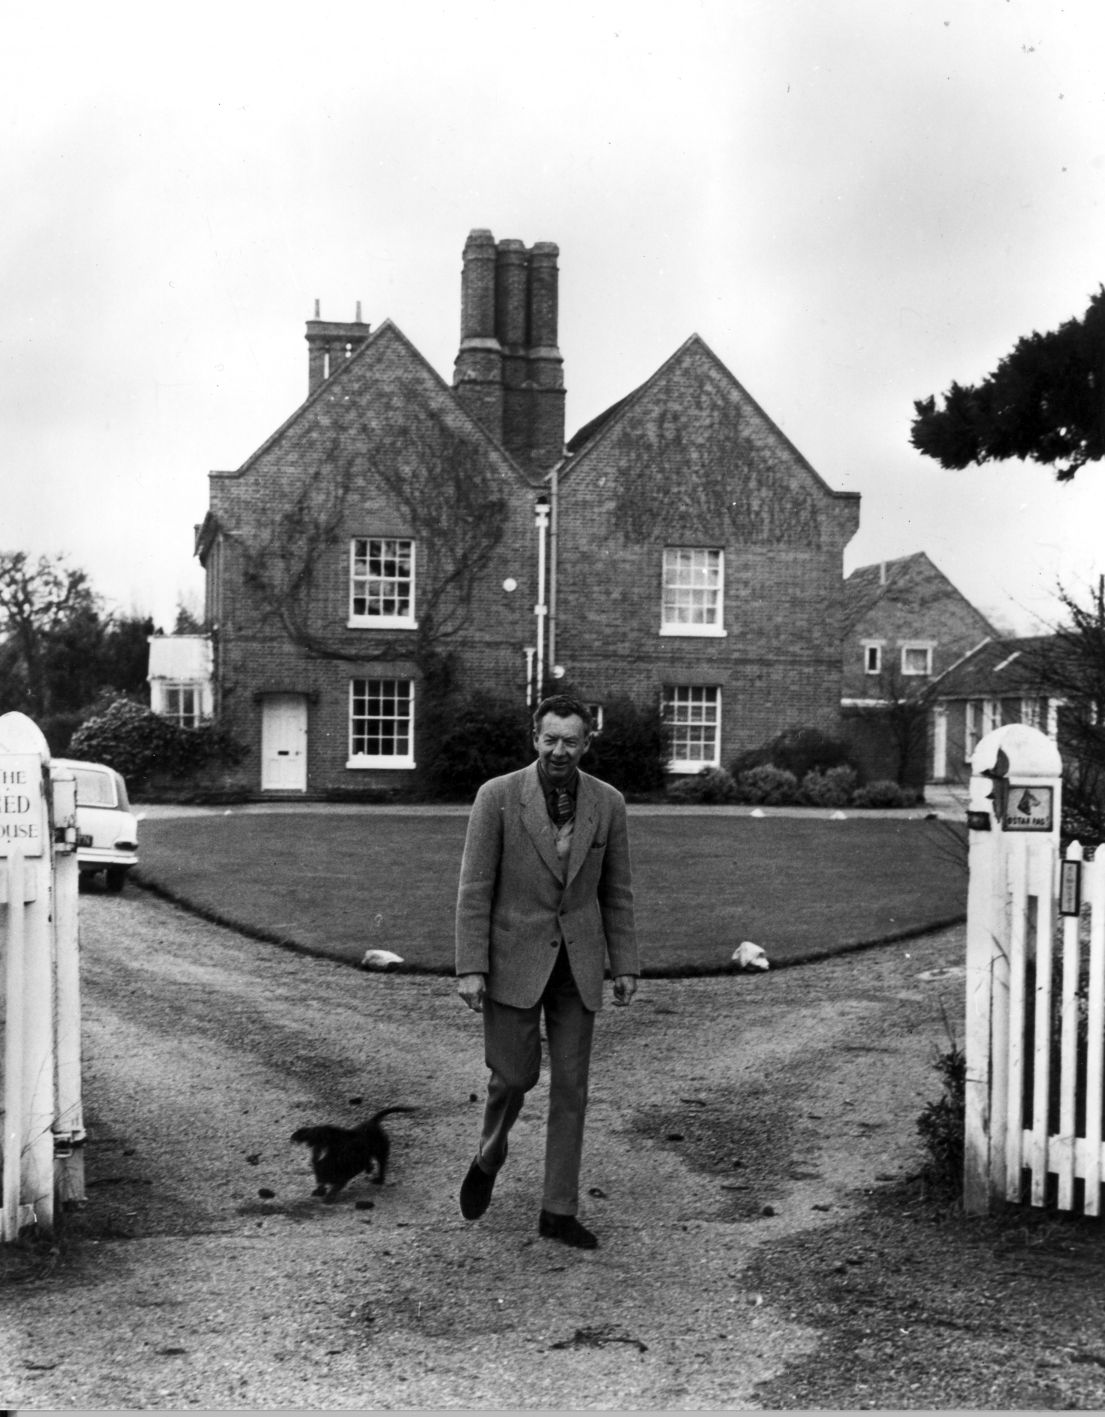 A black and white images of a man in a suit, looking towards the 17th-century farmhouse. Stood by a white fence, behind him the driveway.